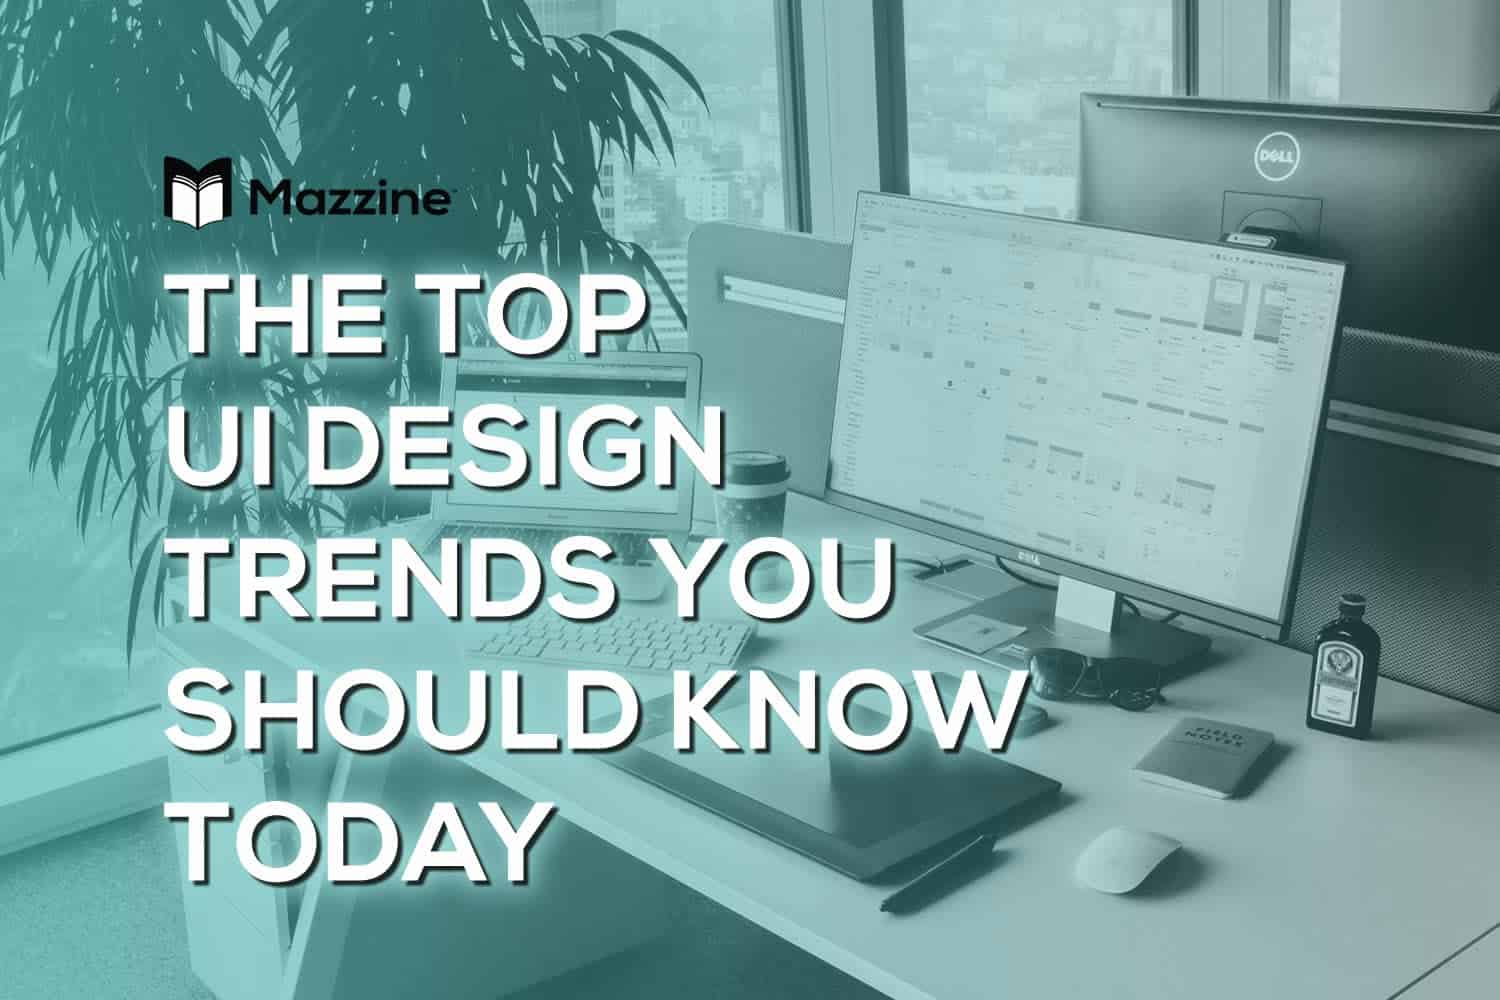 The Top UI Design Trends You Should Know Today